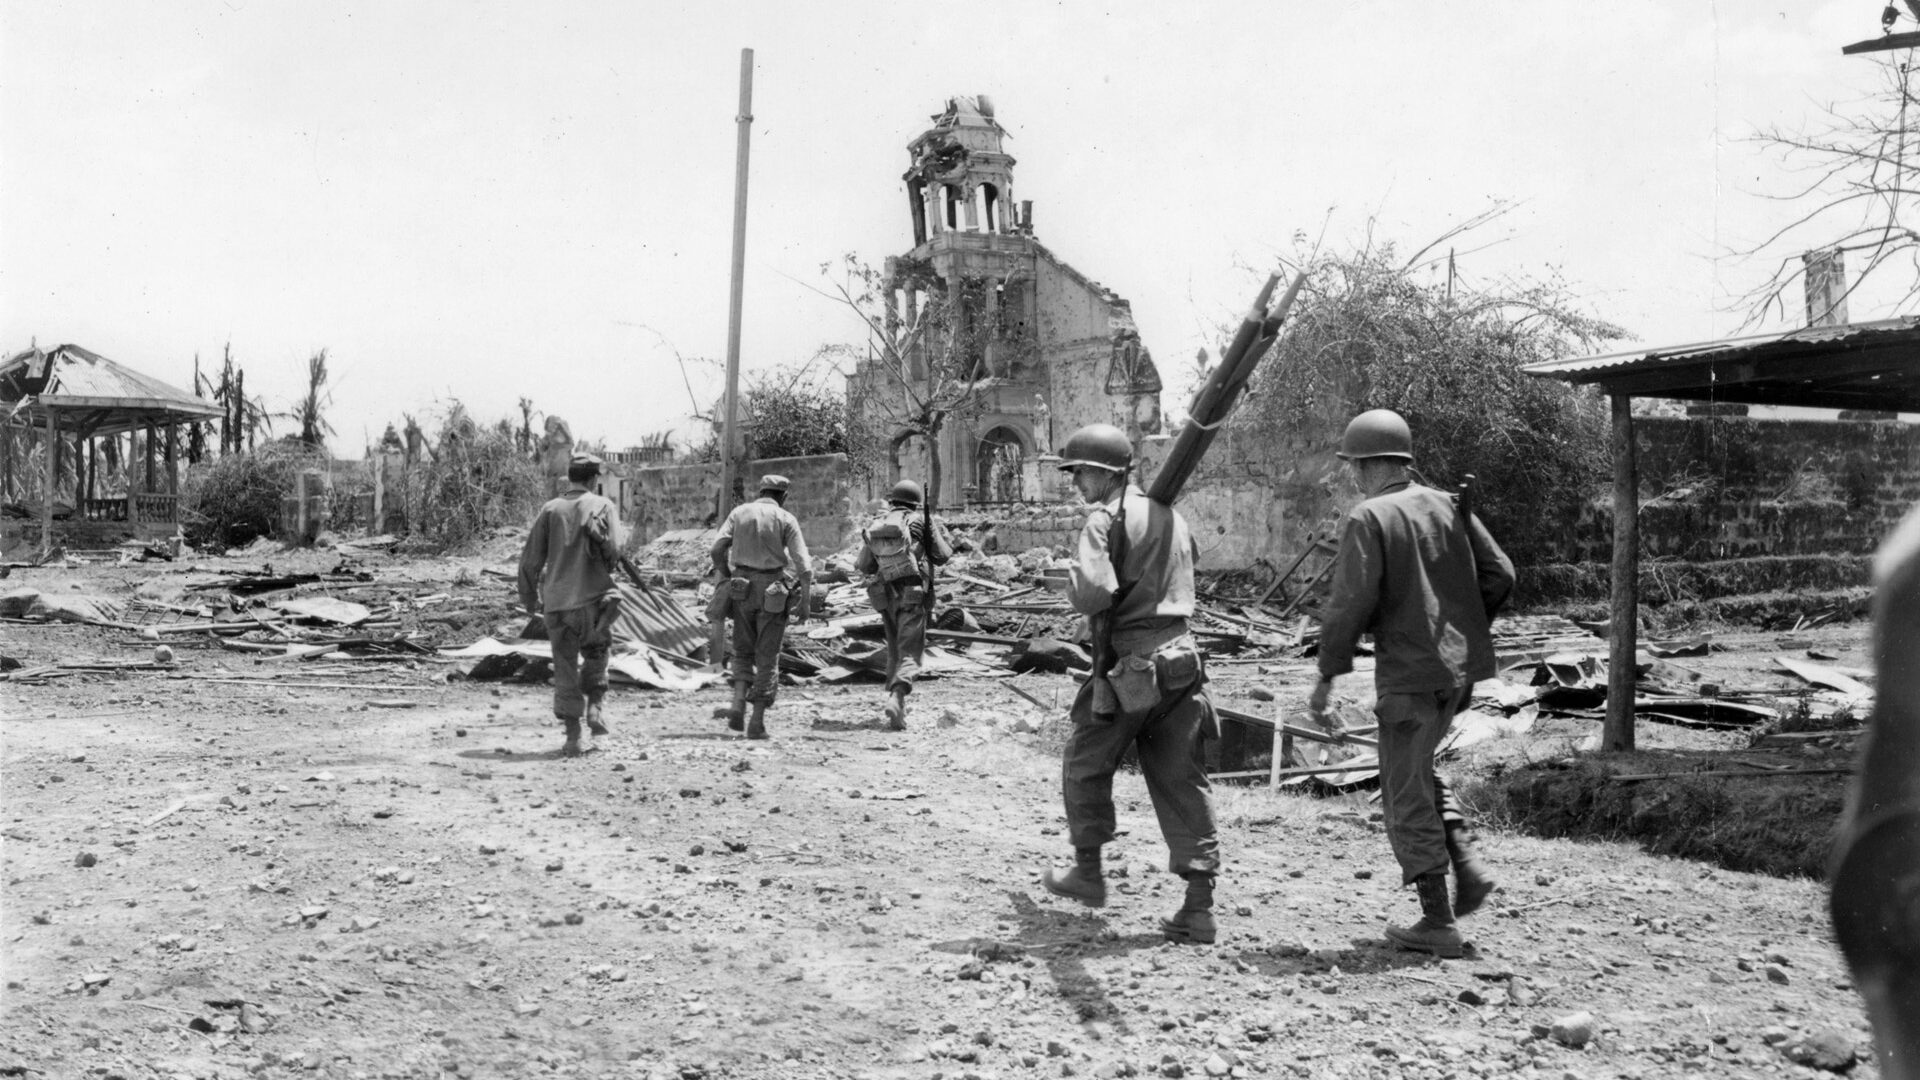 American troops enter the grounds of Santo Tomas University to secure the area and liberate the internees. Some straggling Japanese soldiers were rounded up as the liberation concluded. 